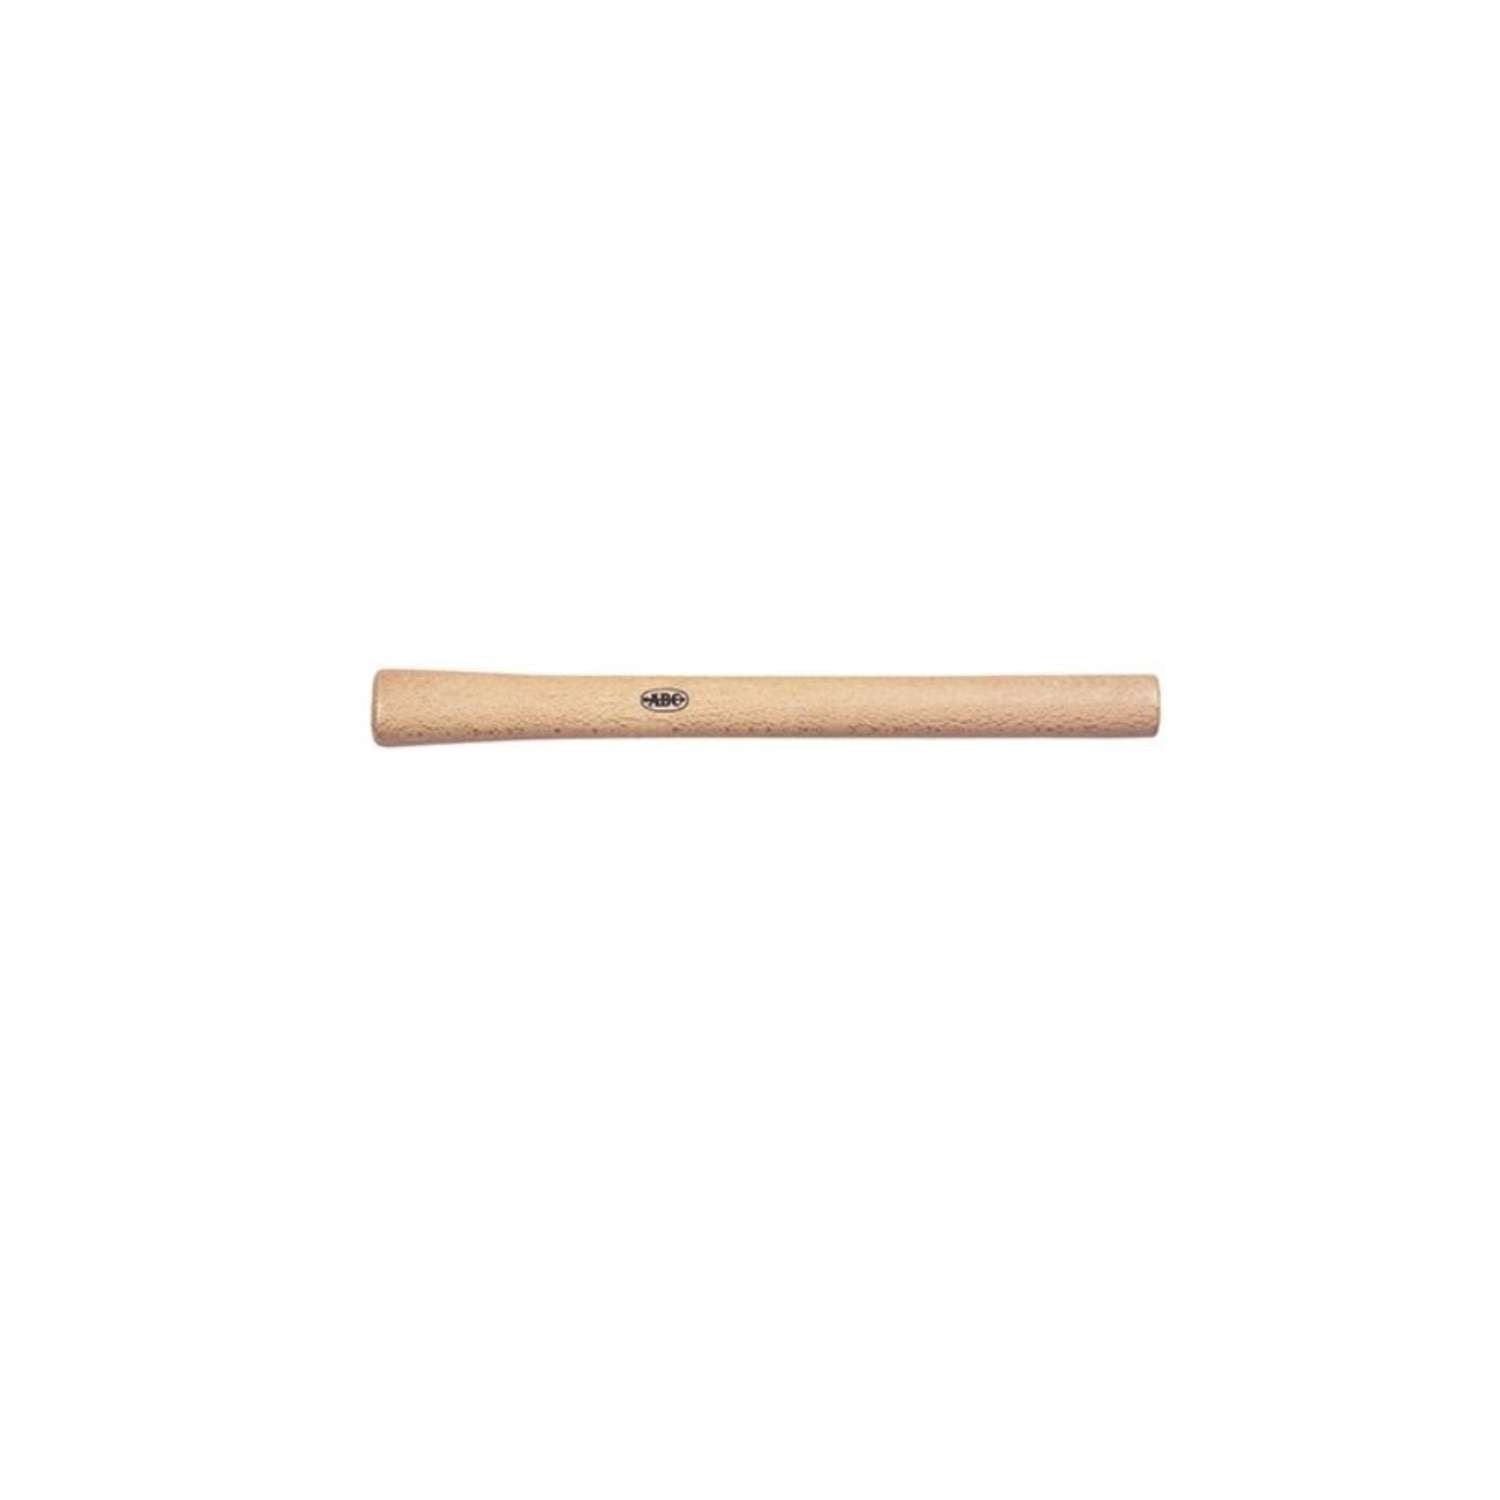 Hammer and hammer handle in wood 400 or 500 g - B 3461 0000